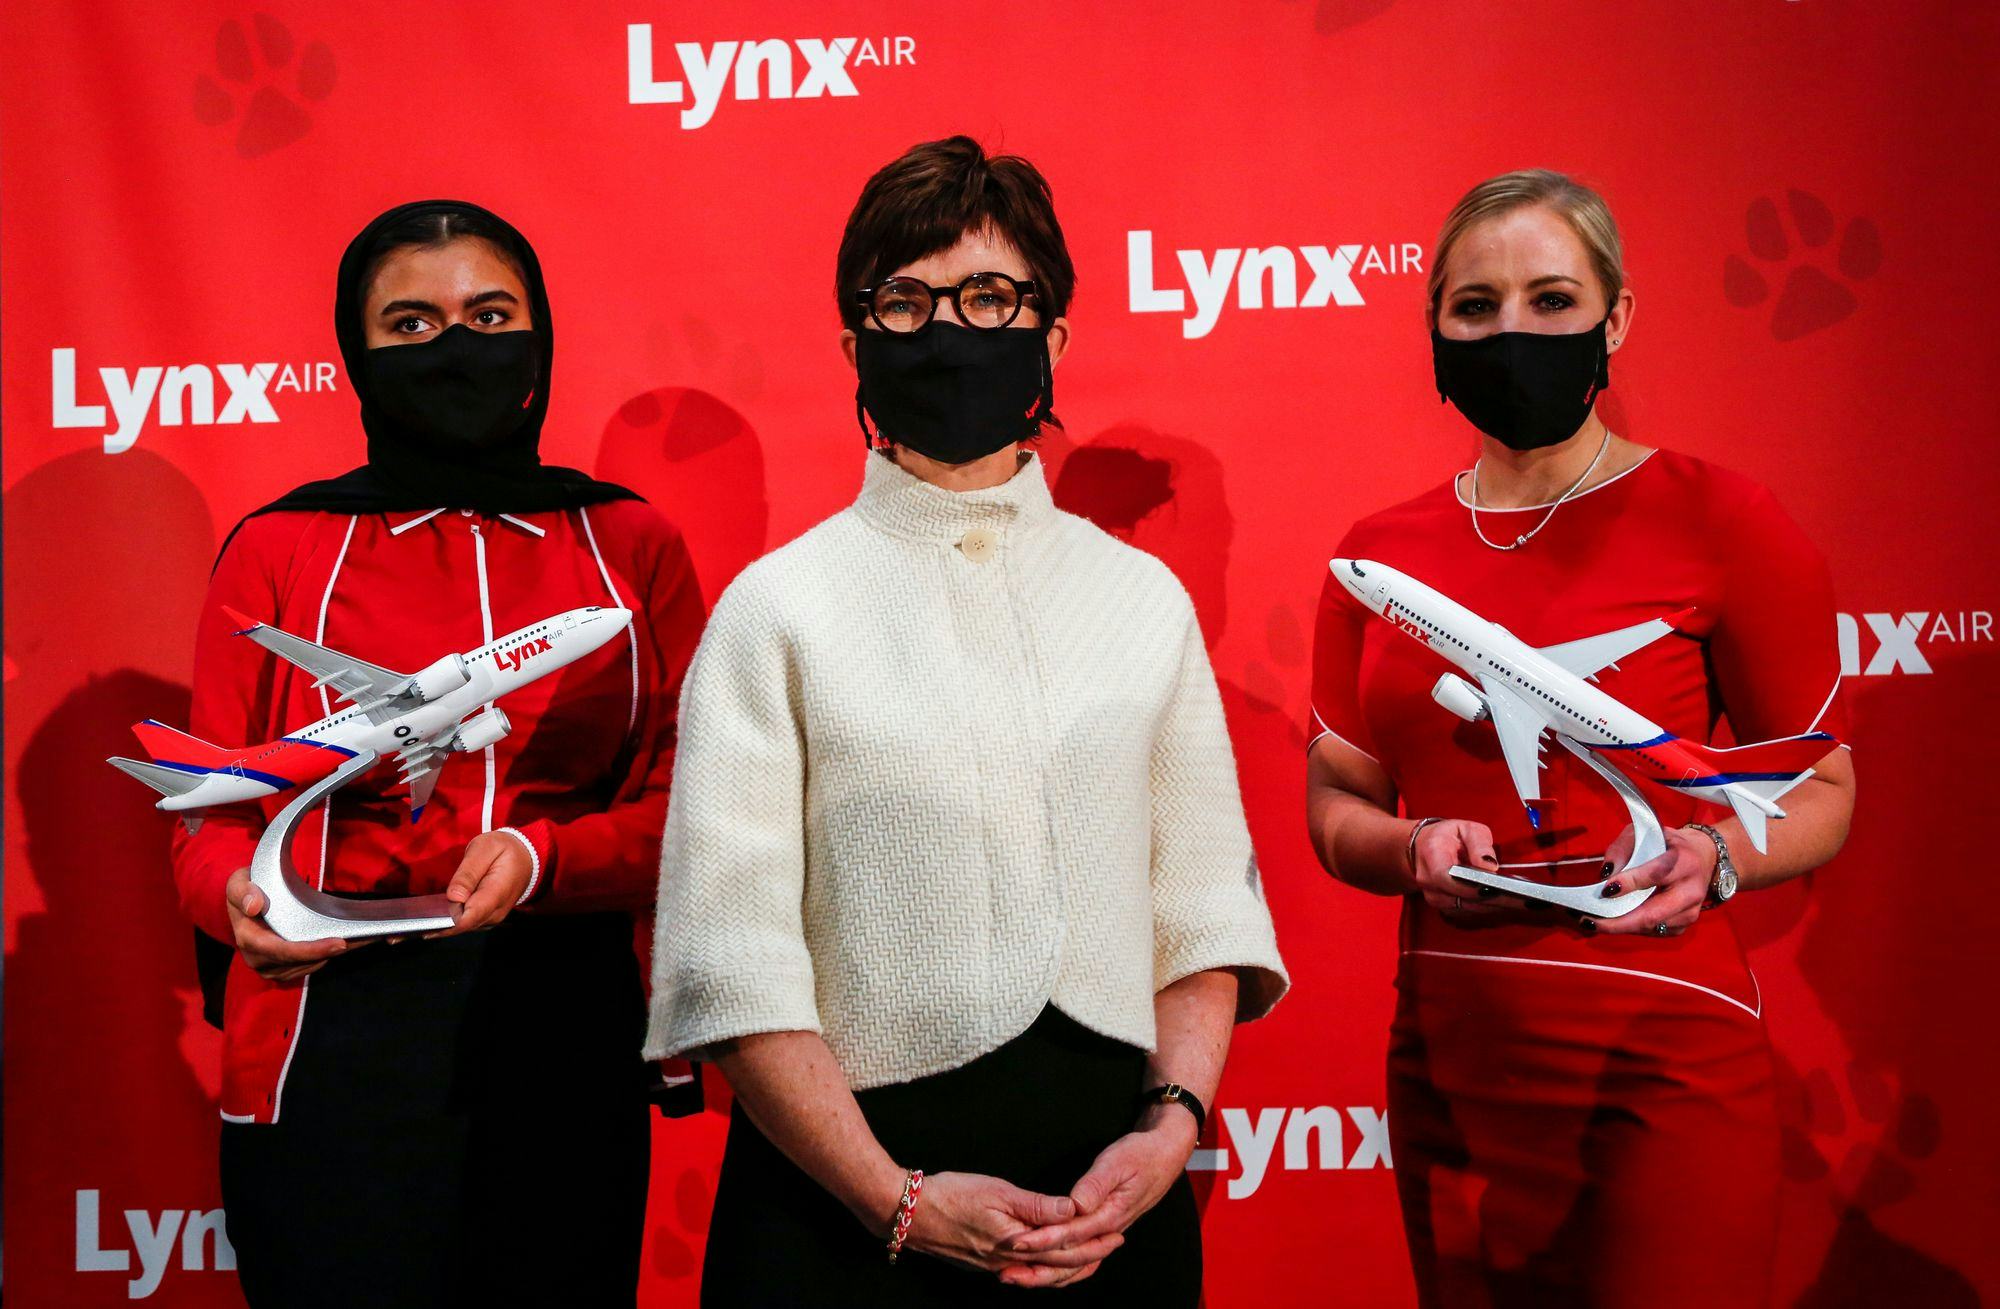 Lynx Air is the latest airline to ask for federal money in turbulent times